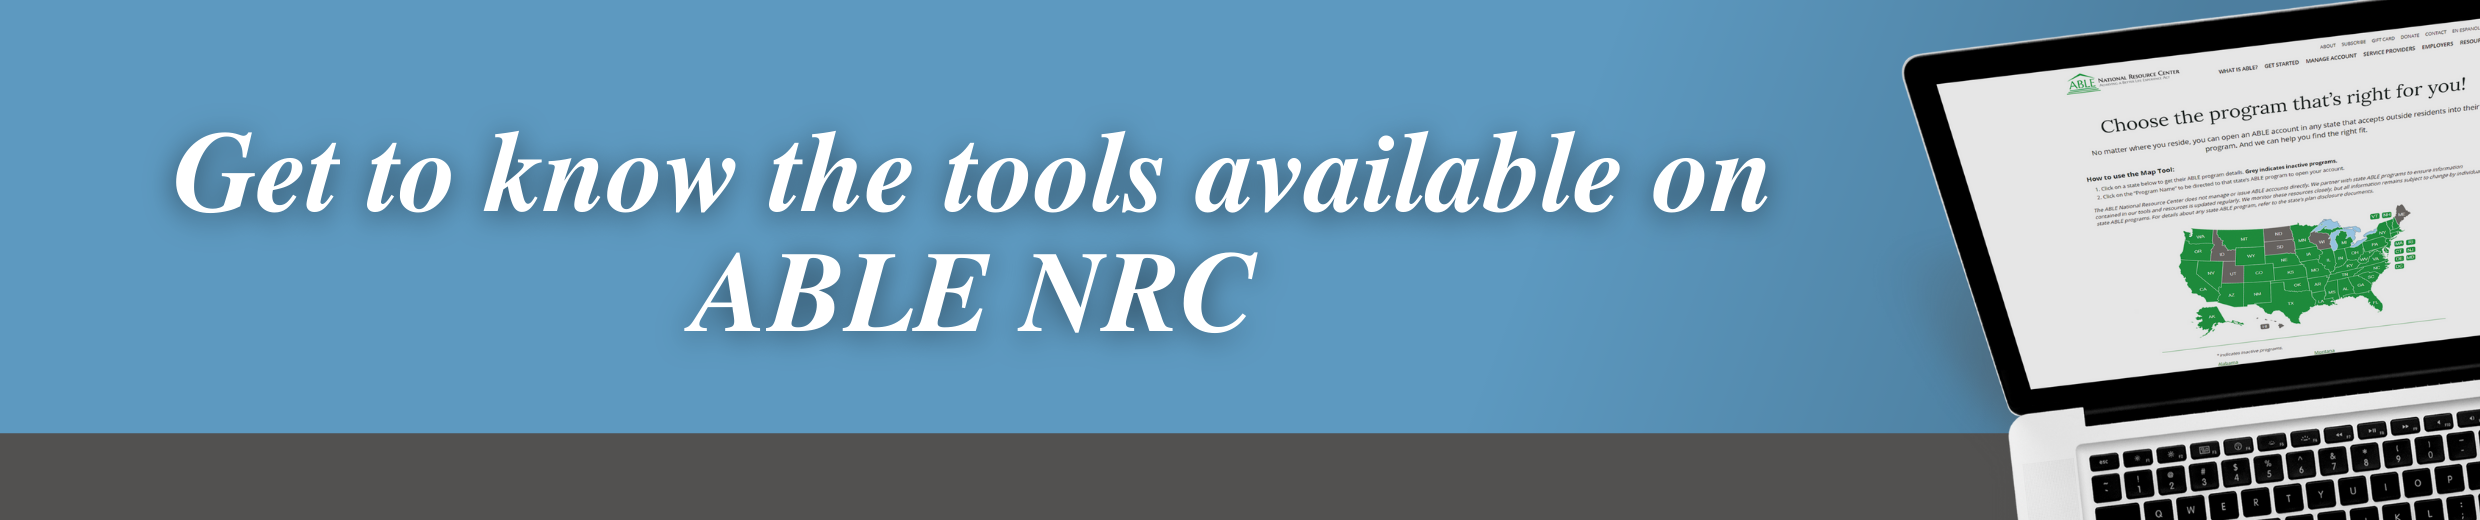 Get to know the tools available on ABLE NRC